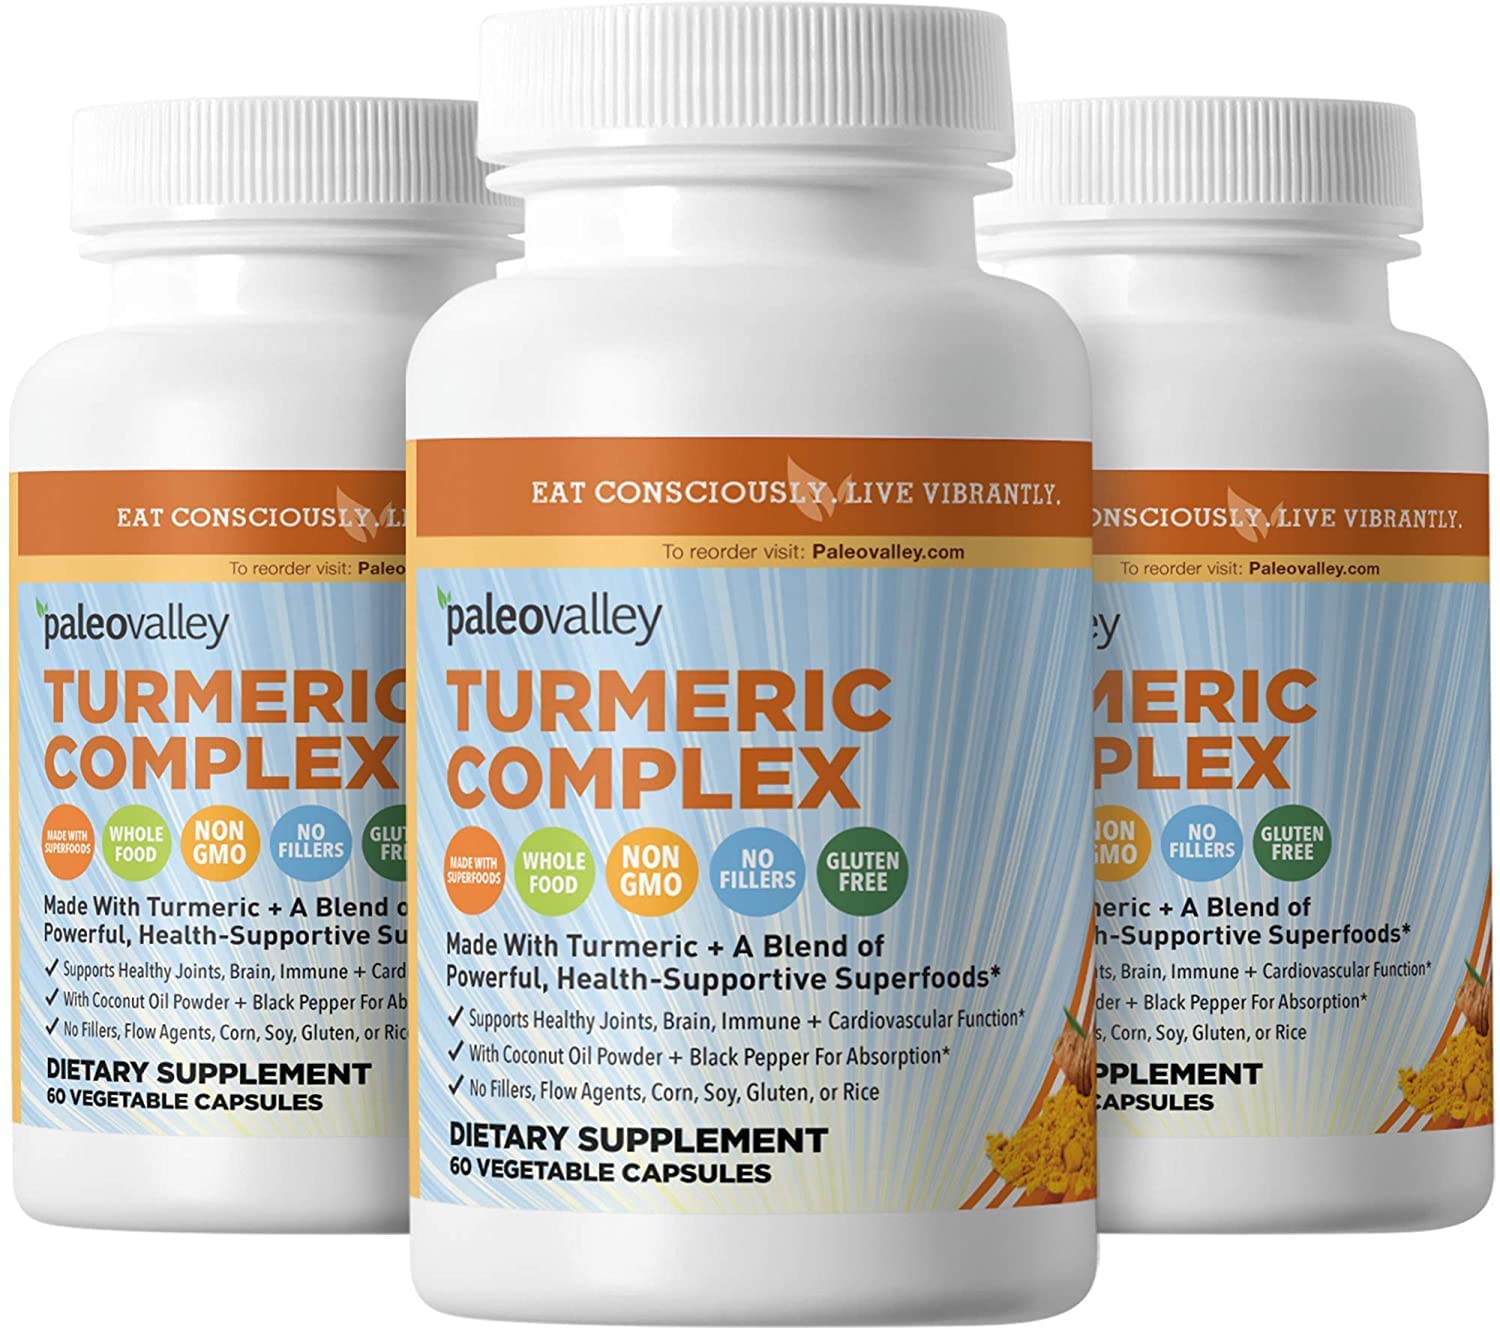 Paleovalley - Organic Turmeric Complex - Full Spectrum Turmeric Nutritional Supplement with Superfoods - 3 Pack (180 Capsules) - Supports Joints, B...